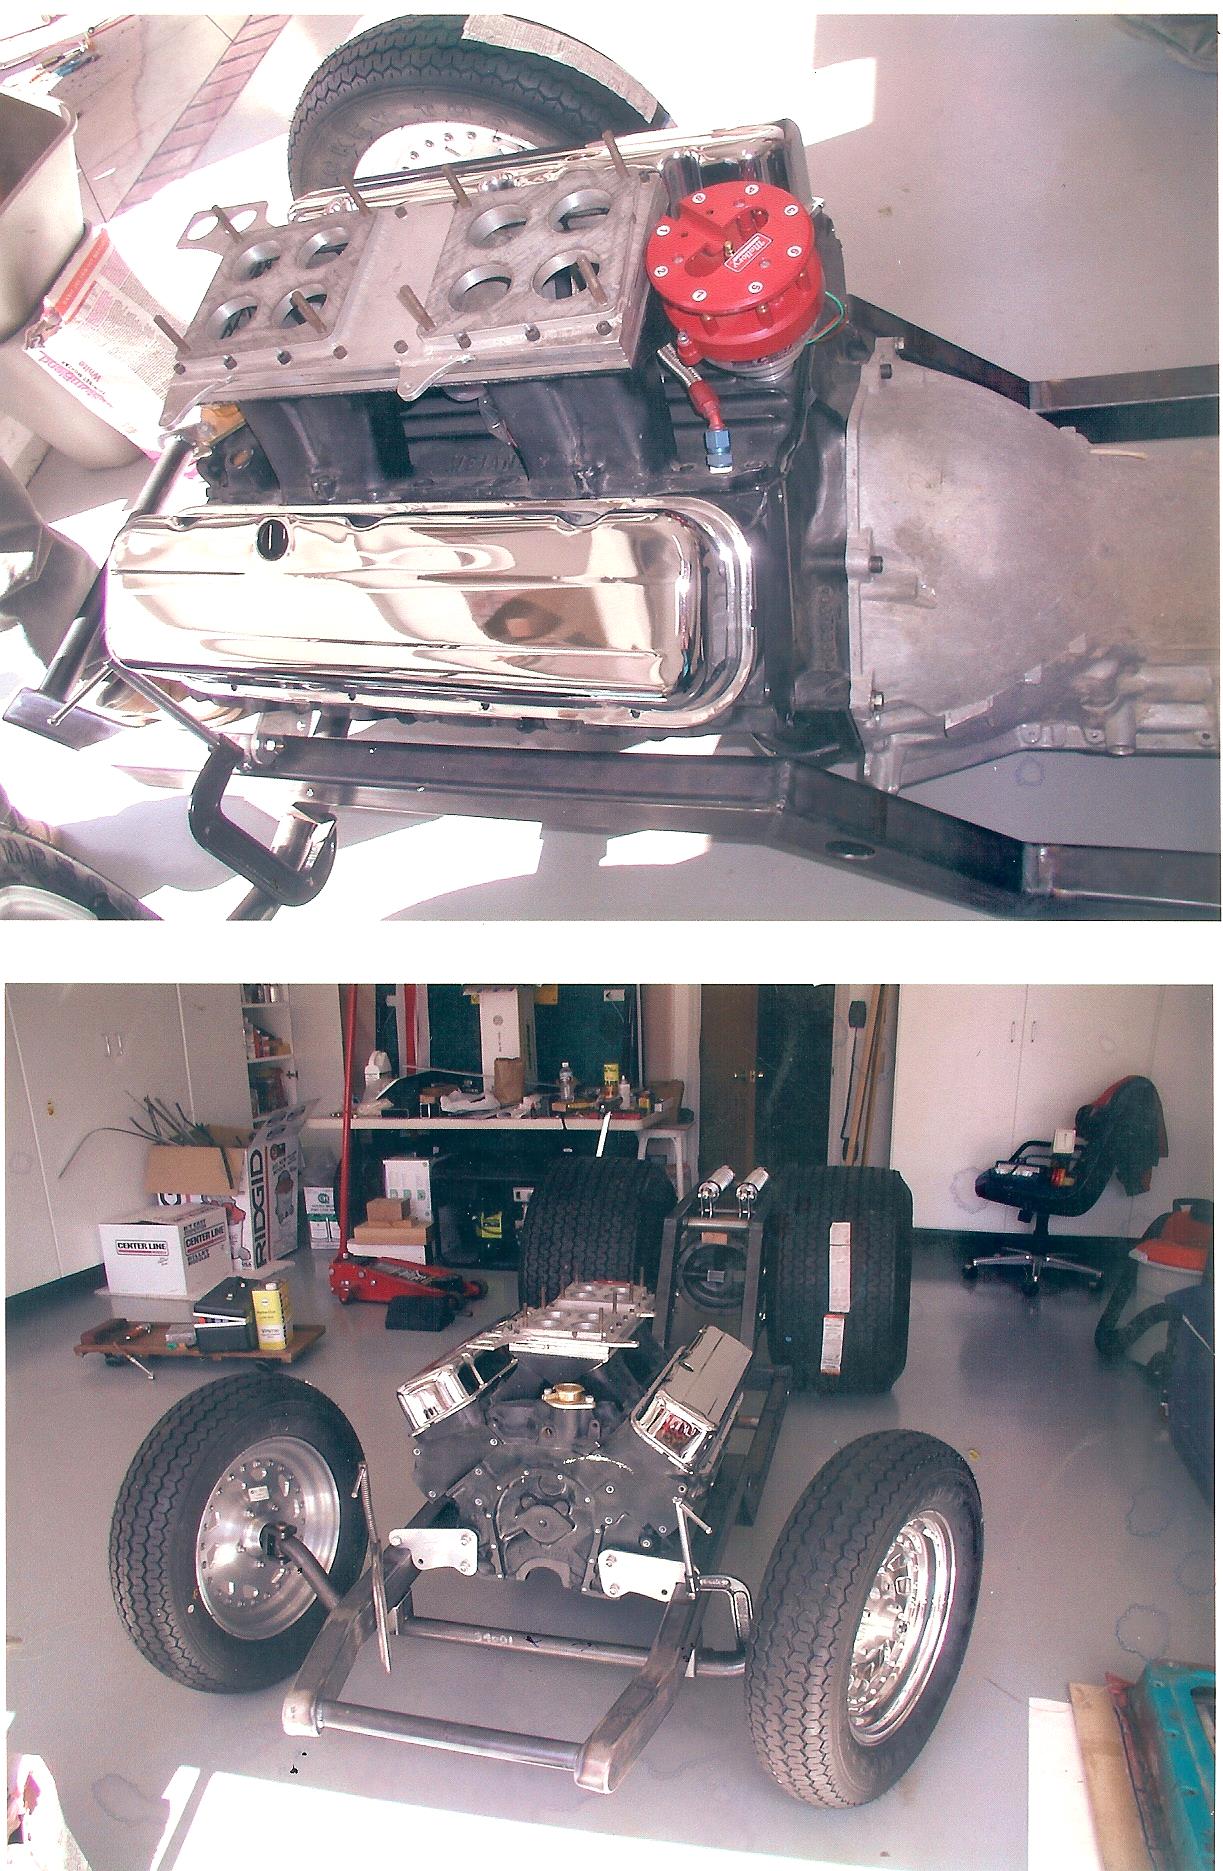 Two Views of the Bottom of the Car